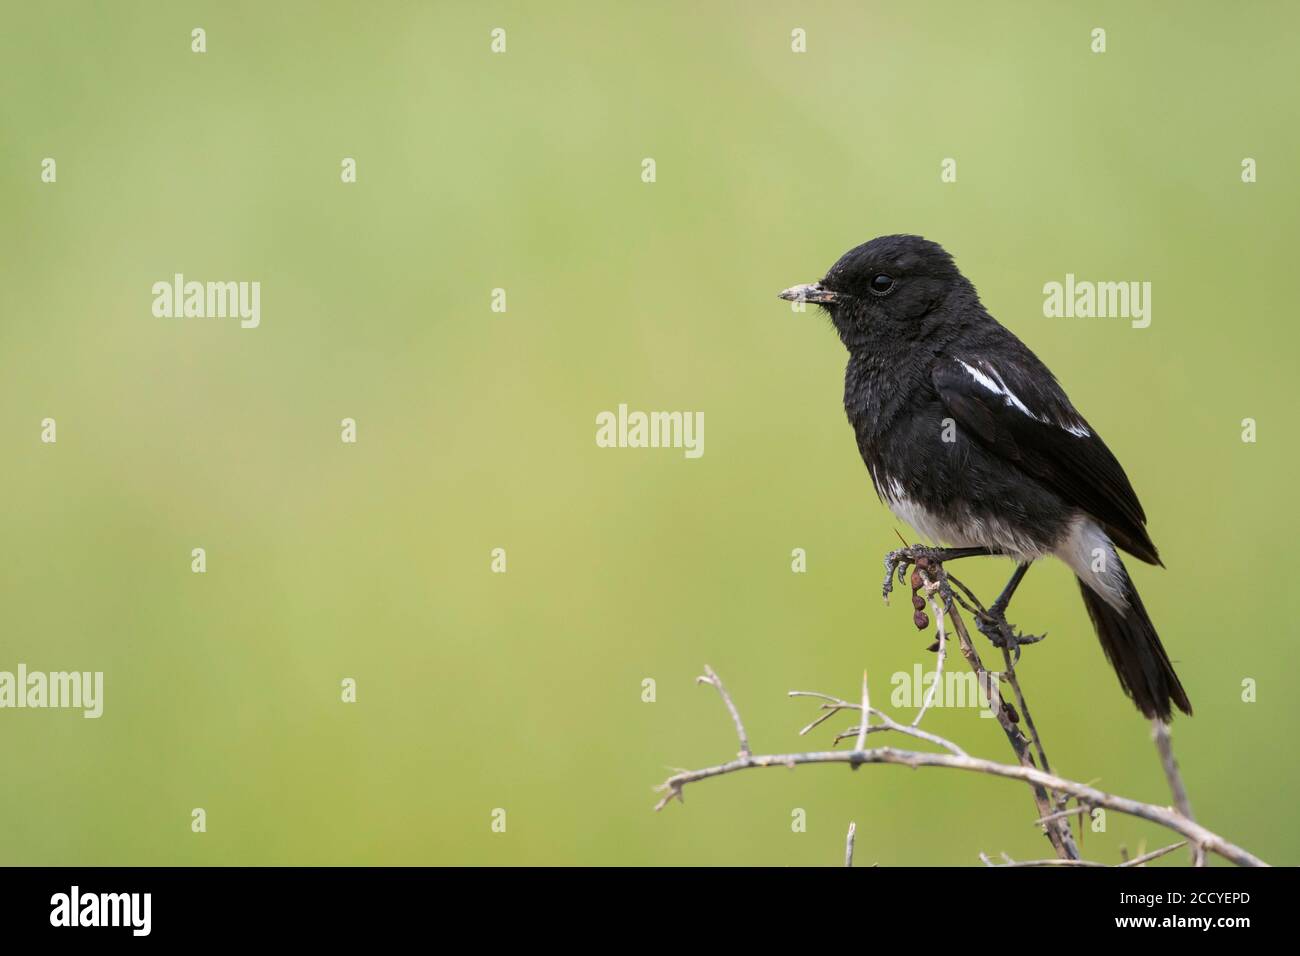 Pied Stonechat (Saxicola caprea rossorum), Tajikistan, adult male perched on a branch with green background Stock Photo